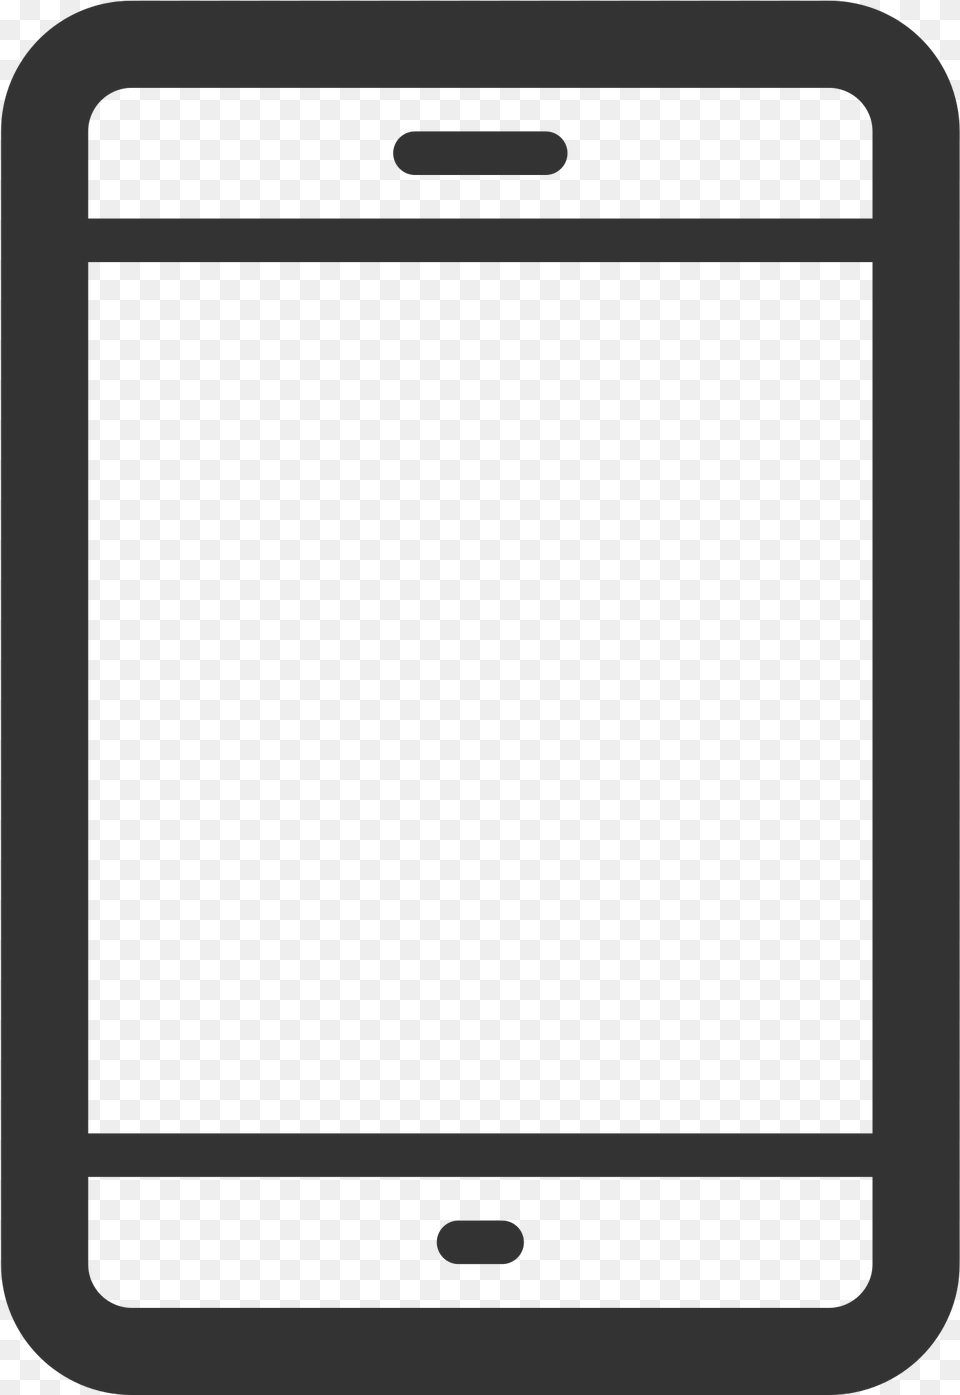 File Linecons Smartphone Outline Svg Wikimedia Commons Cell Phone Black And White Clipart Iphone, Electronics, Mobile Phone Png Image